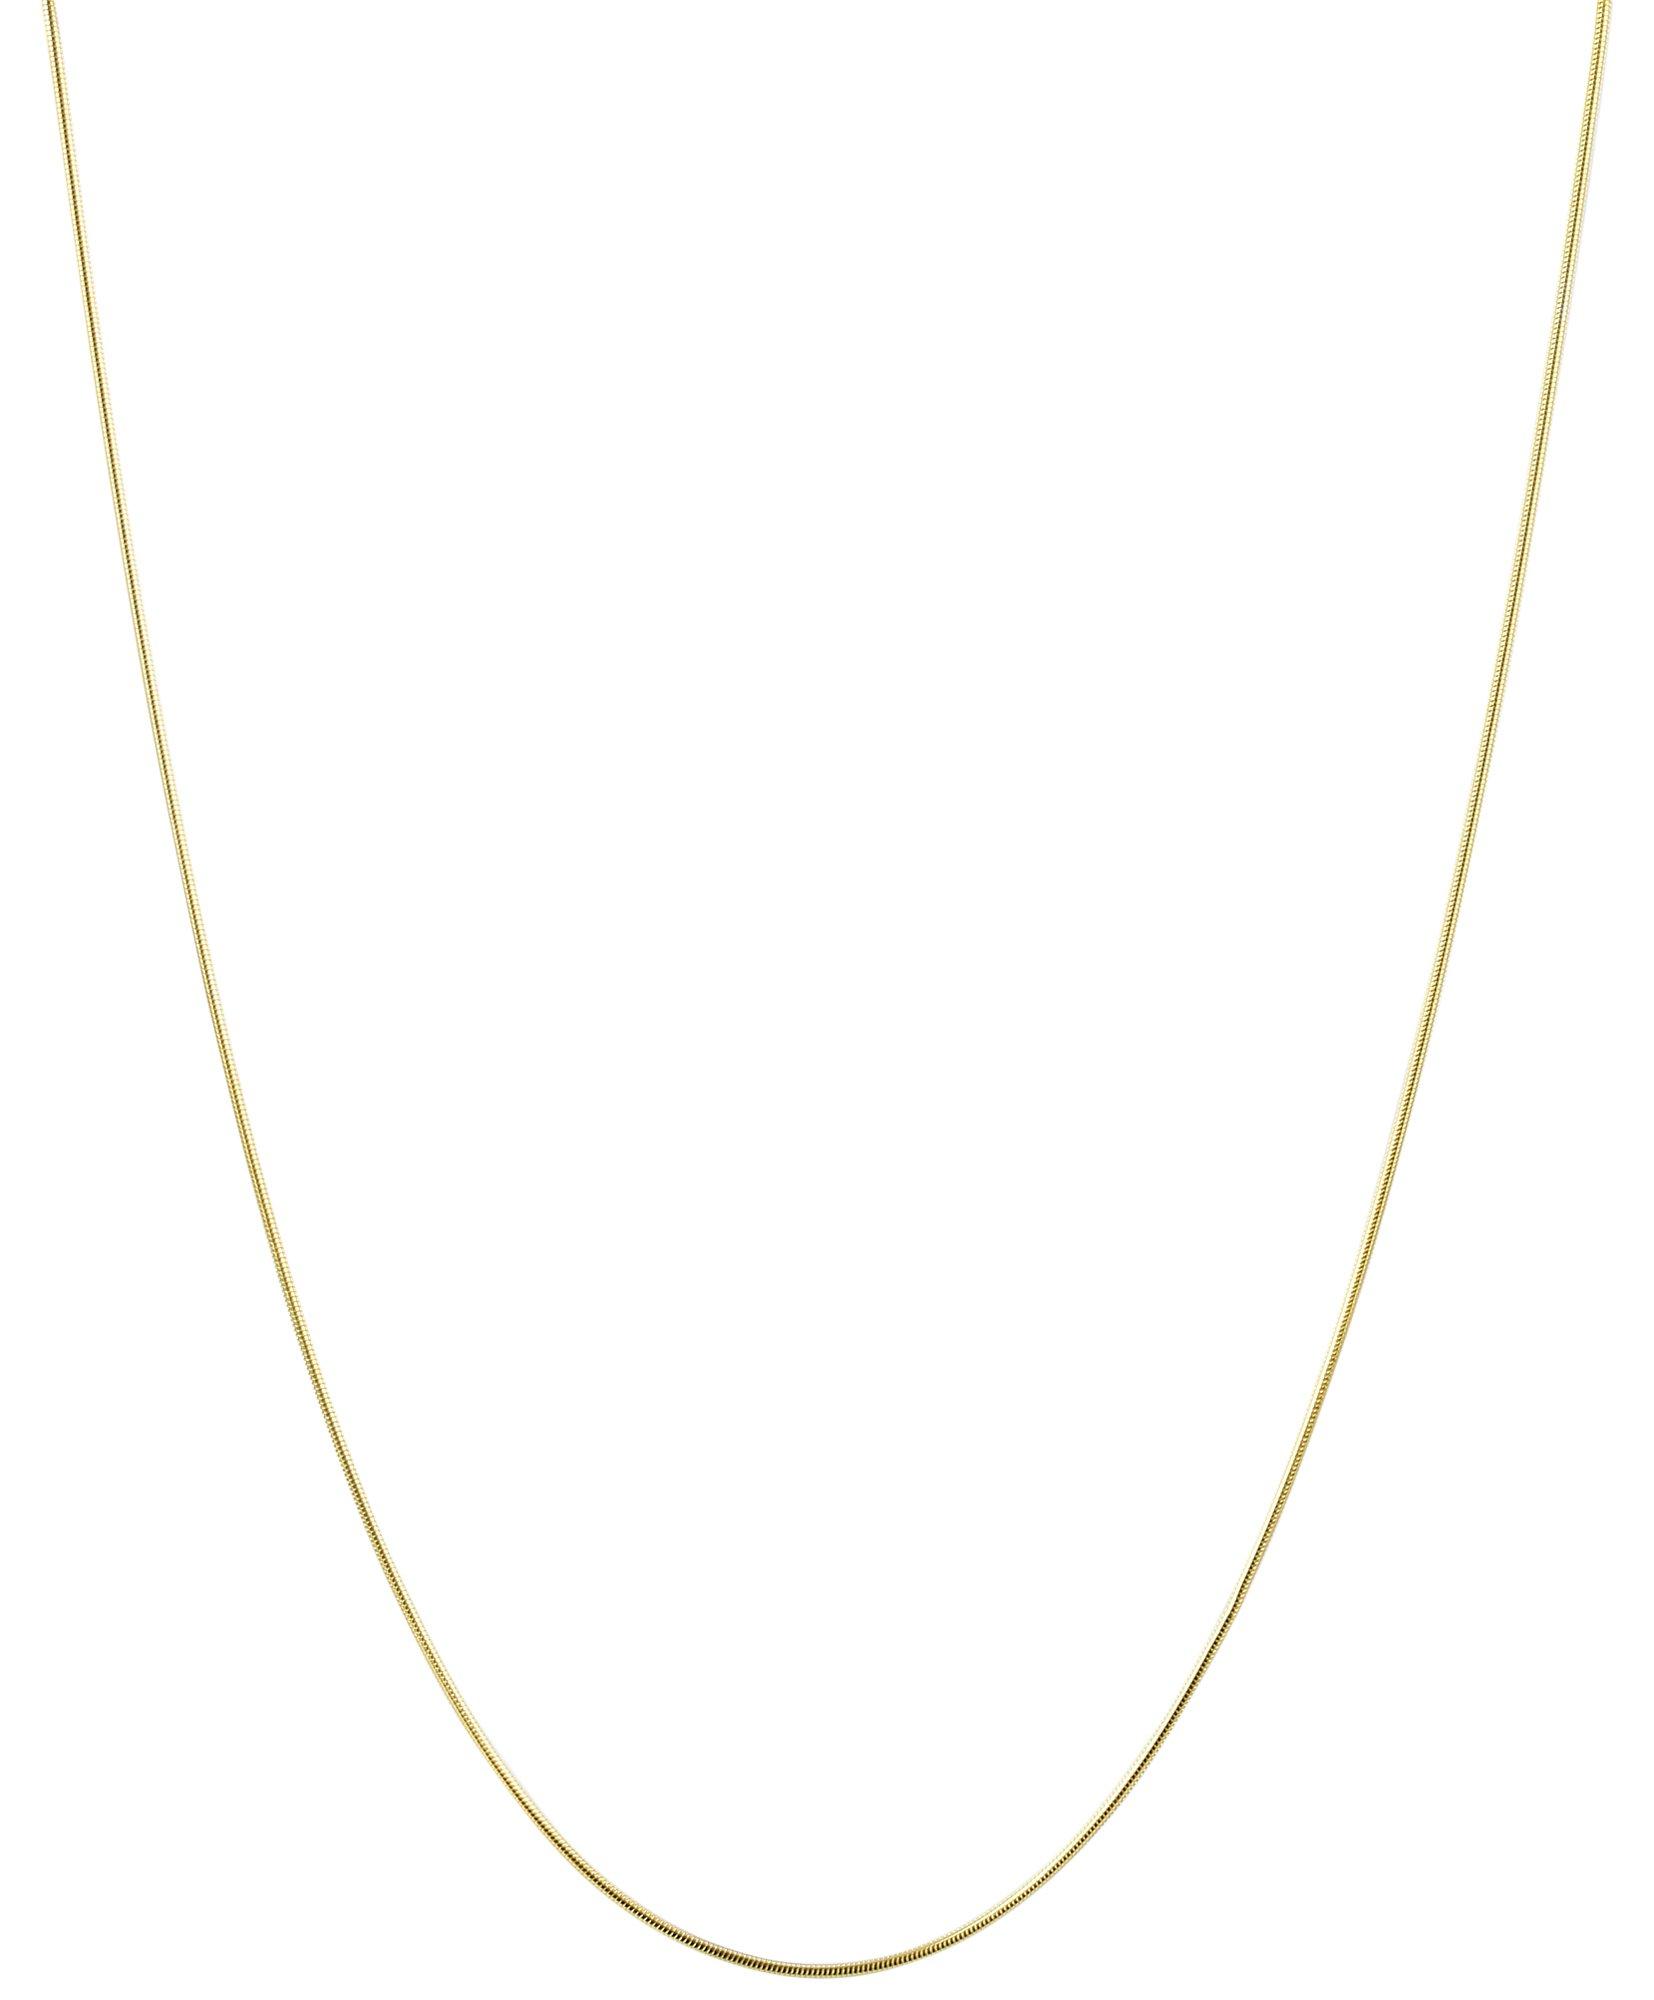 Piper & Taylor 24 In. Gold Plate Snake Chain Necklace